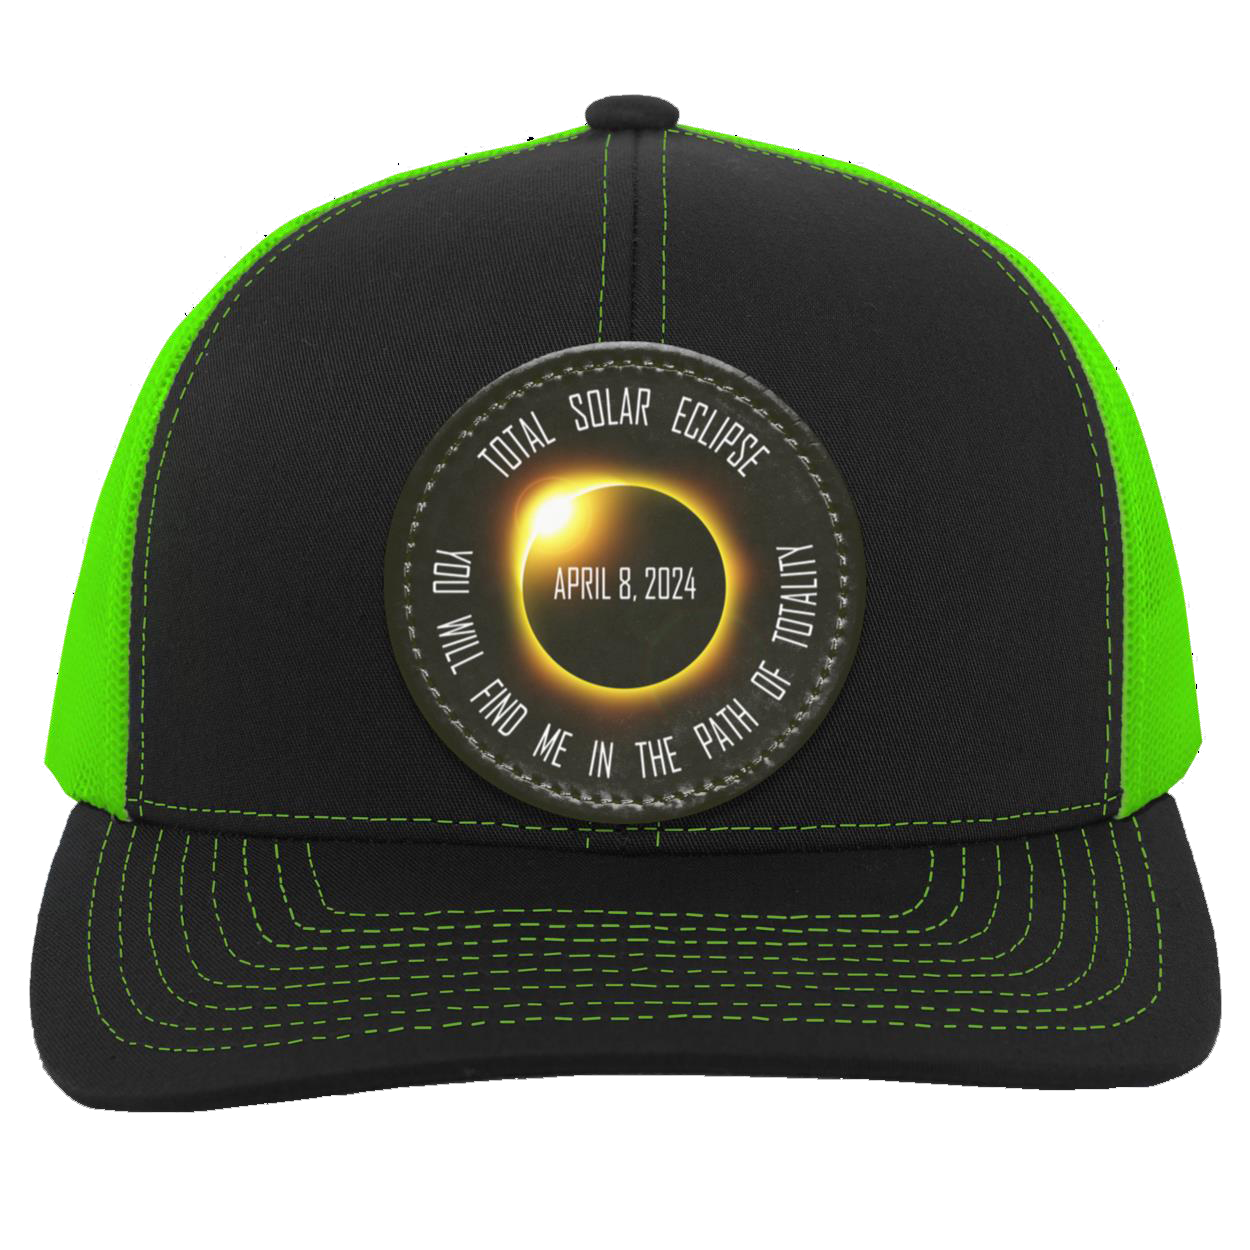 Total Solar Eclipse hat cap, April 8 2024 eclipse, Find Me In the Path of Totality, Trucker Snap Back - Patch